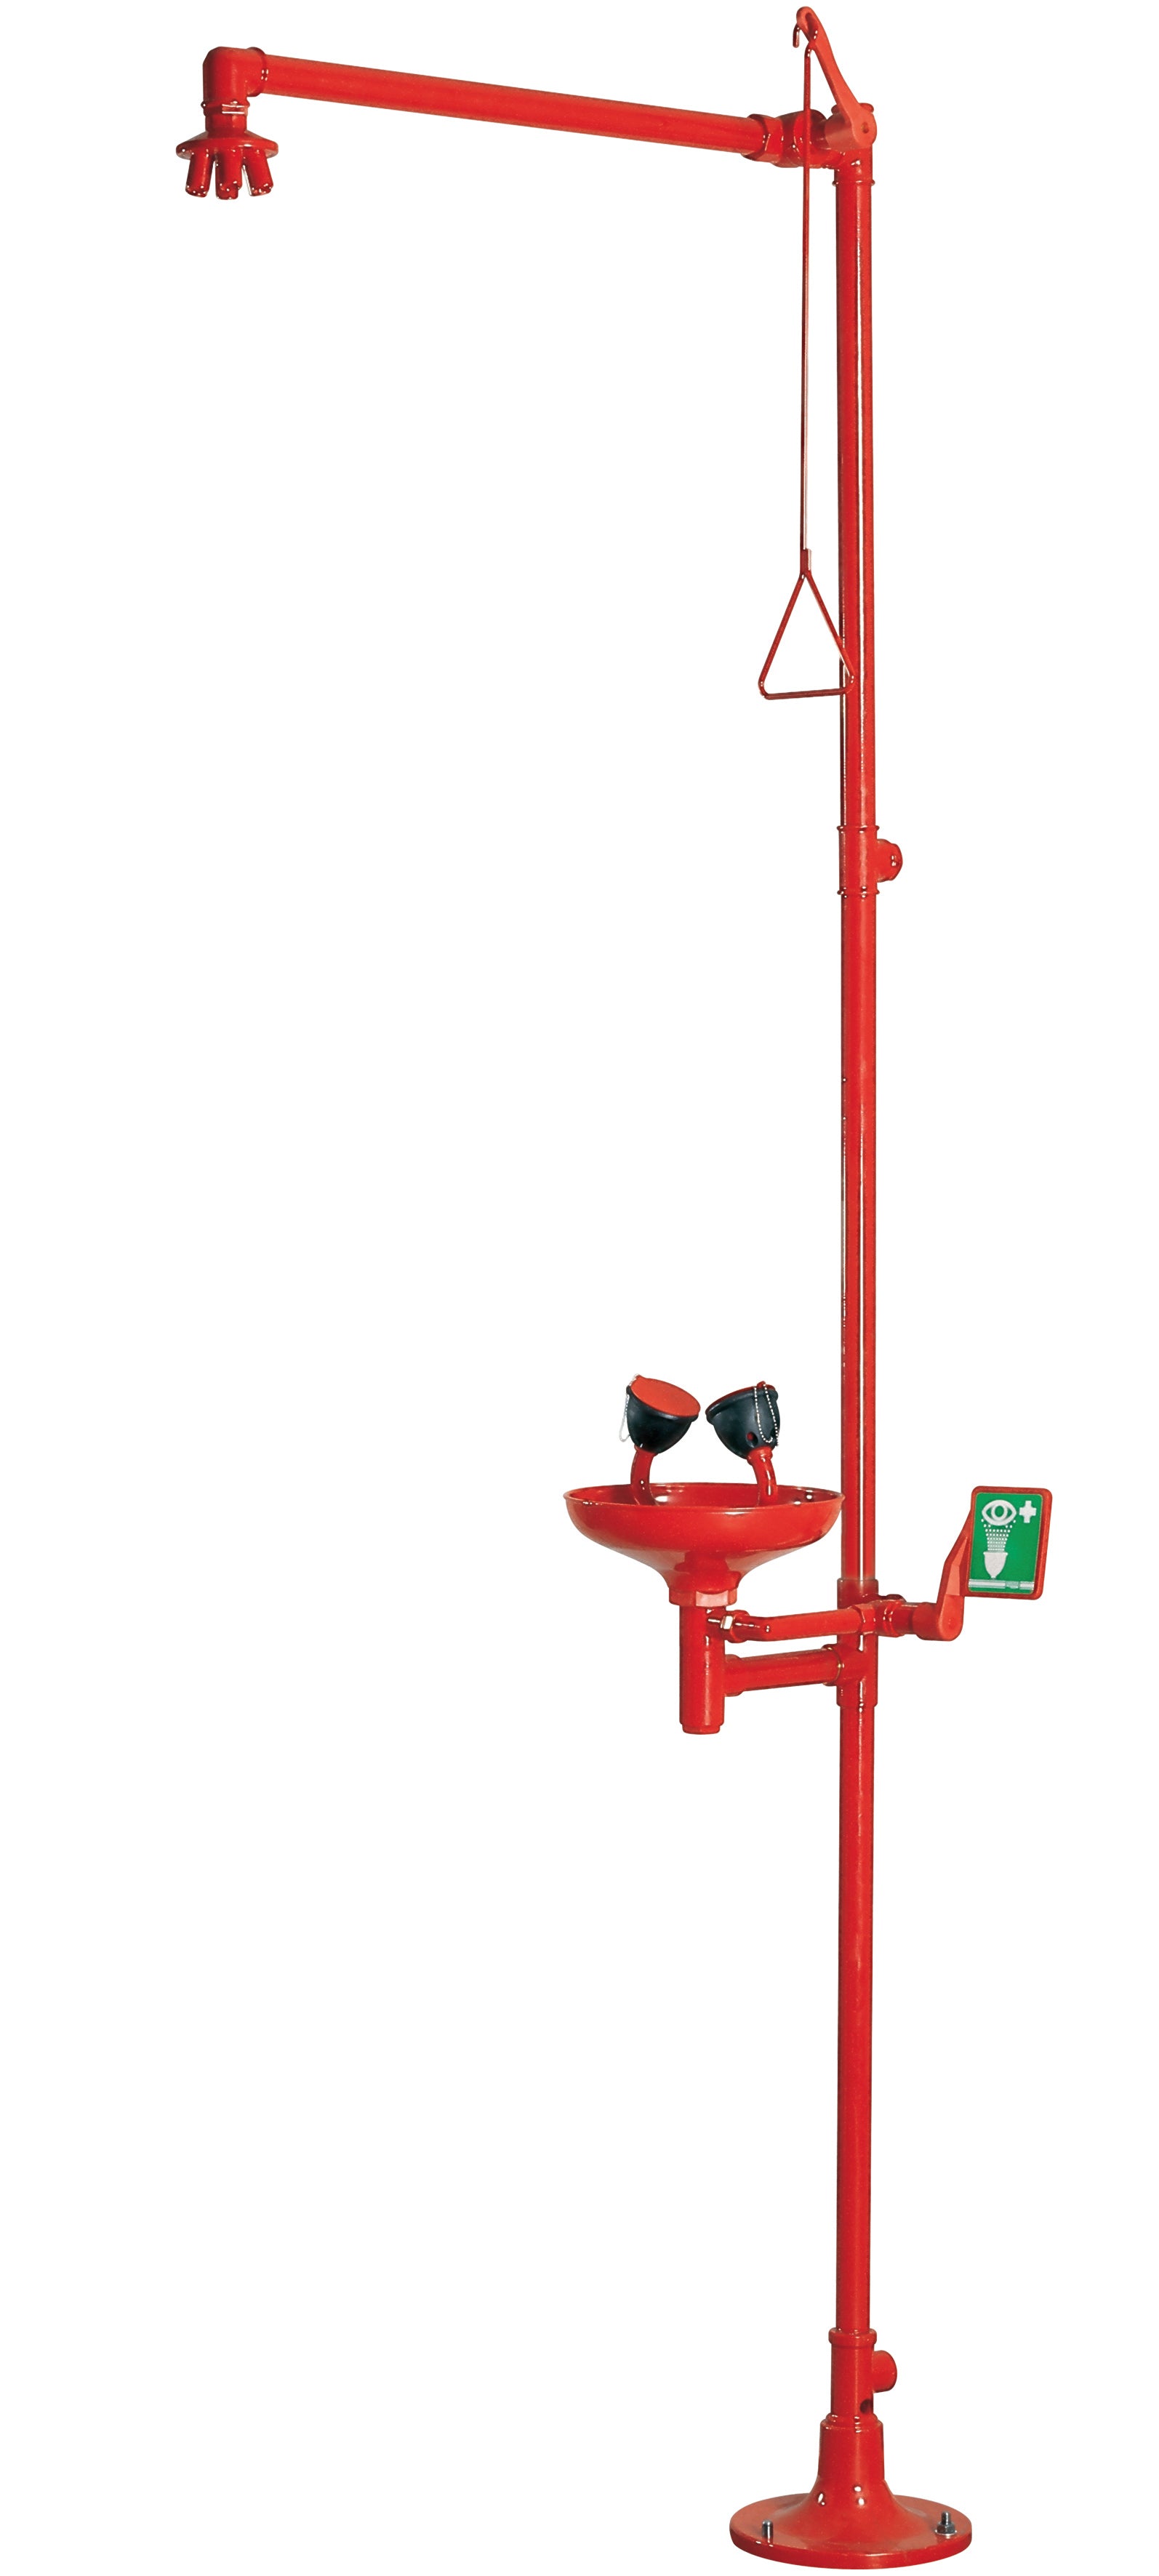 Body shower steel red, free standing, steel powder-coated smooth